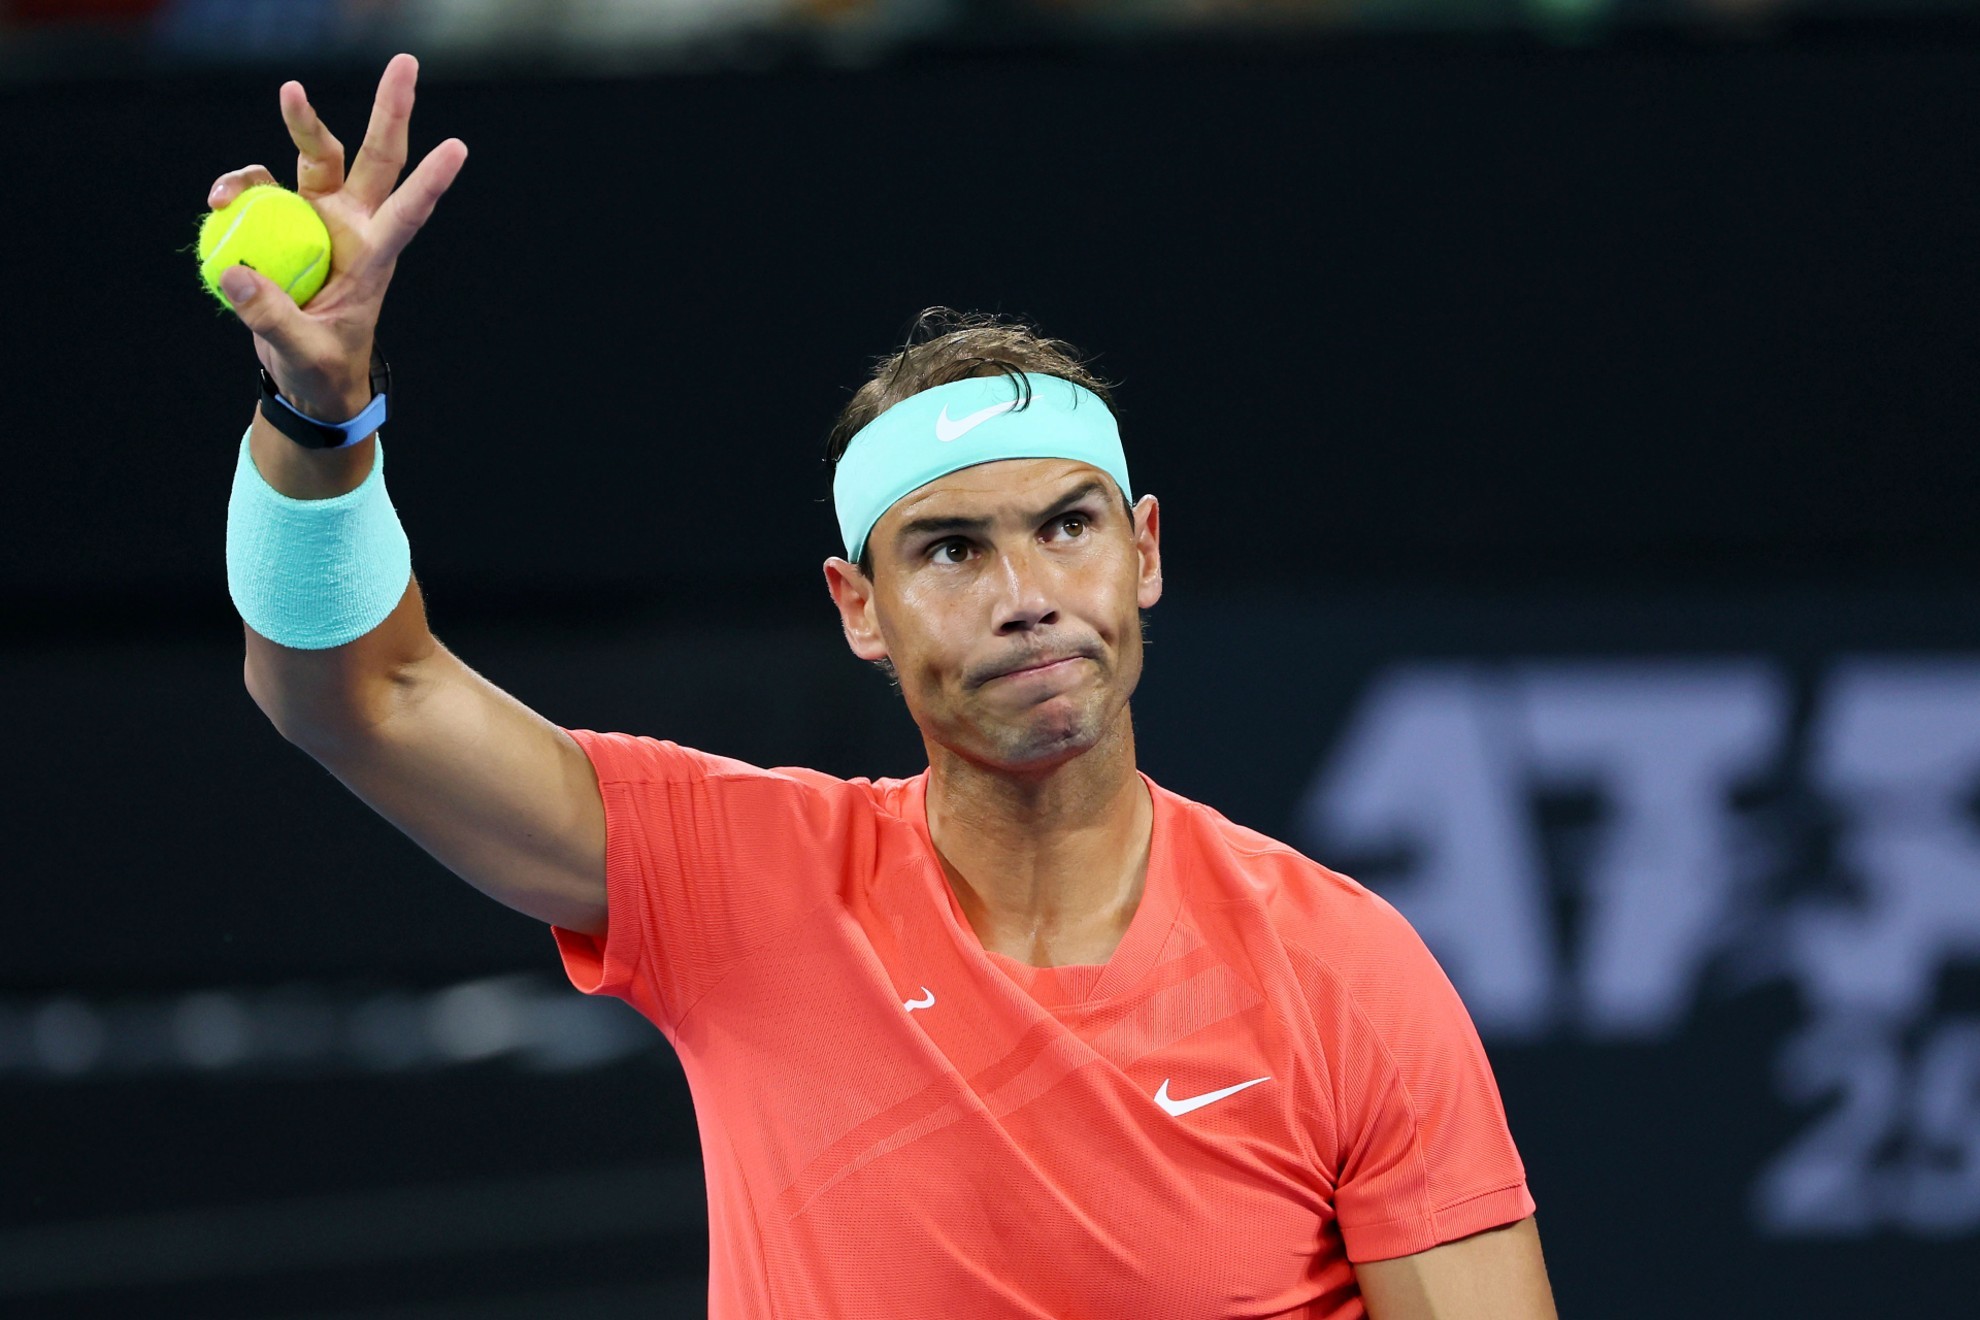 Rafael Nadal of Spain waves to the crowd in his match against Dominic Thiem.